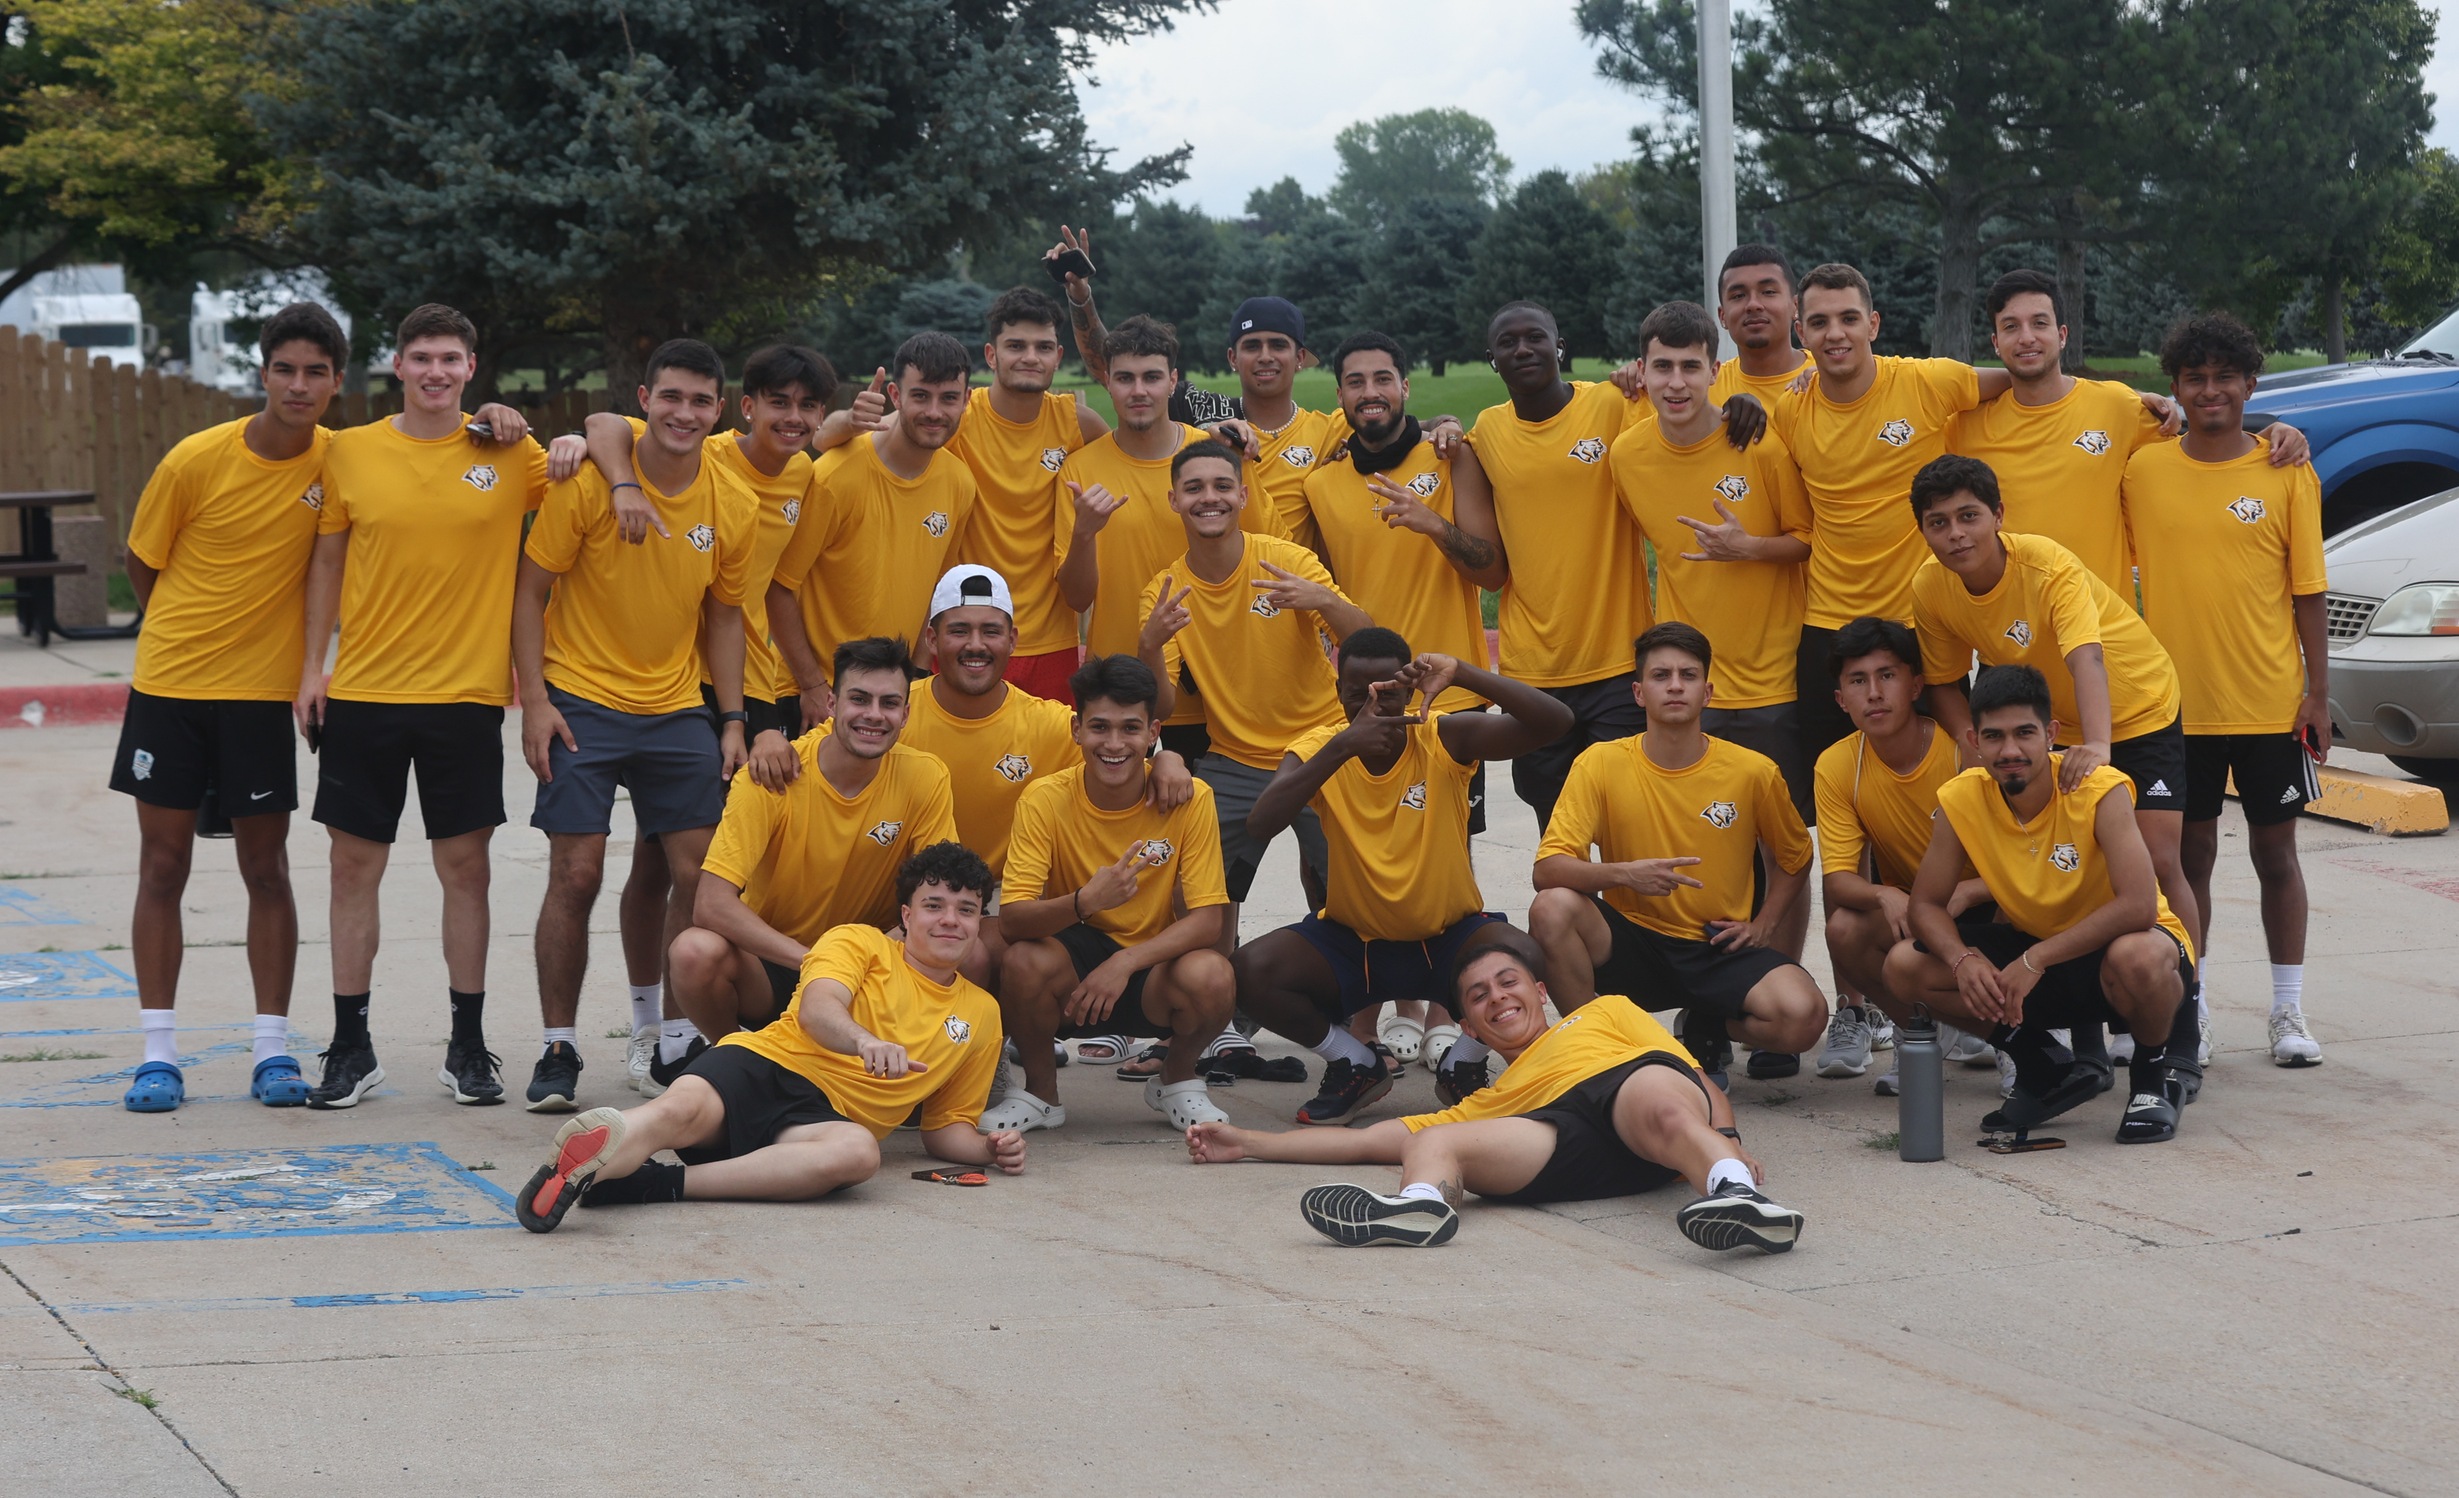 The WNCC men's soccer team pose for a picture after an afternoon workout.